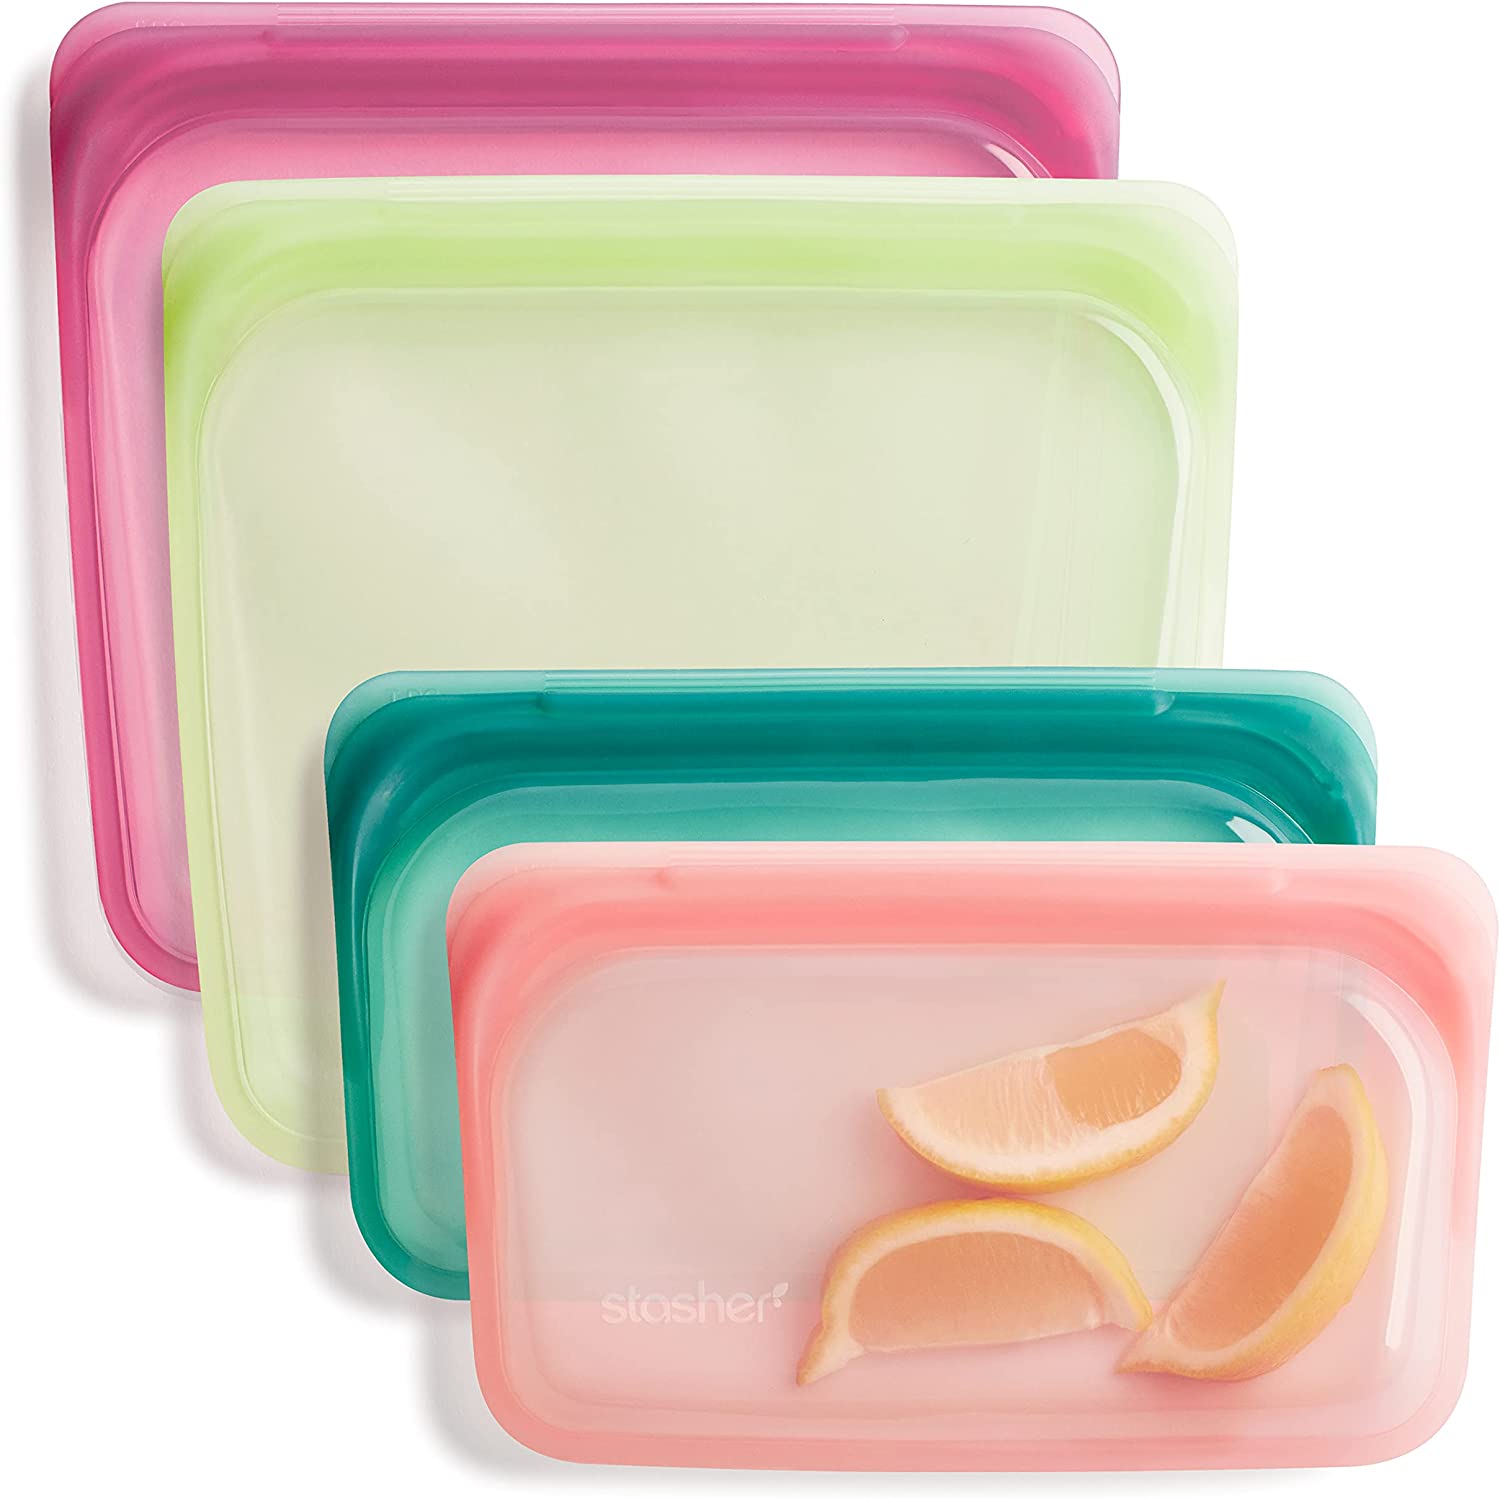 Four translucent silicone Stasher bags. Two Sandwich sized, one coral, the other lemon yellow. The remain two are half-sandwich sized bags one forest green, the other peach. 